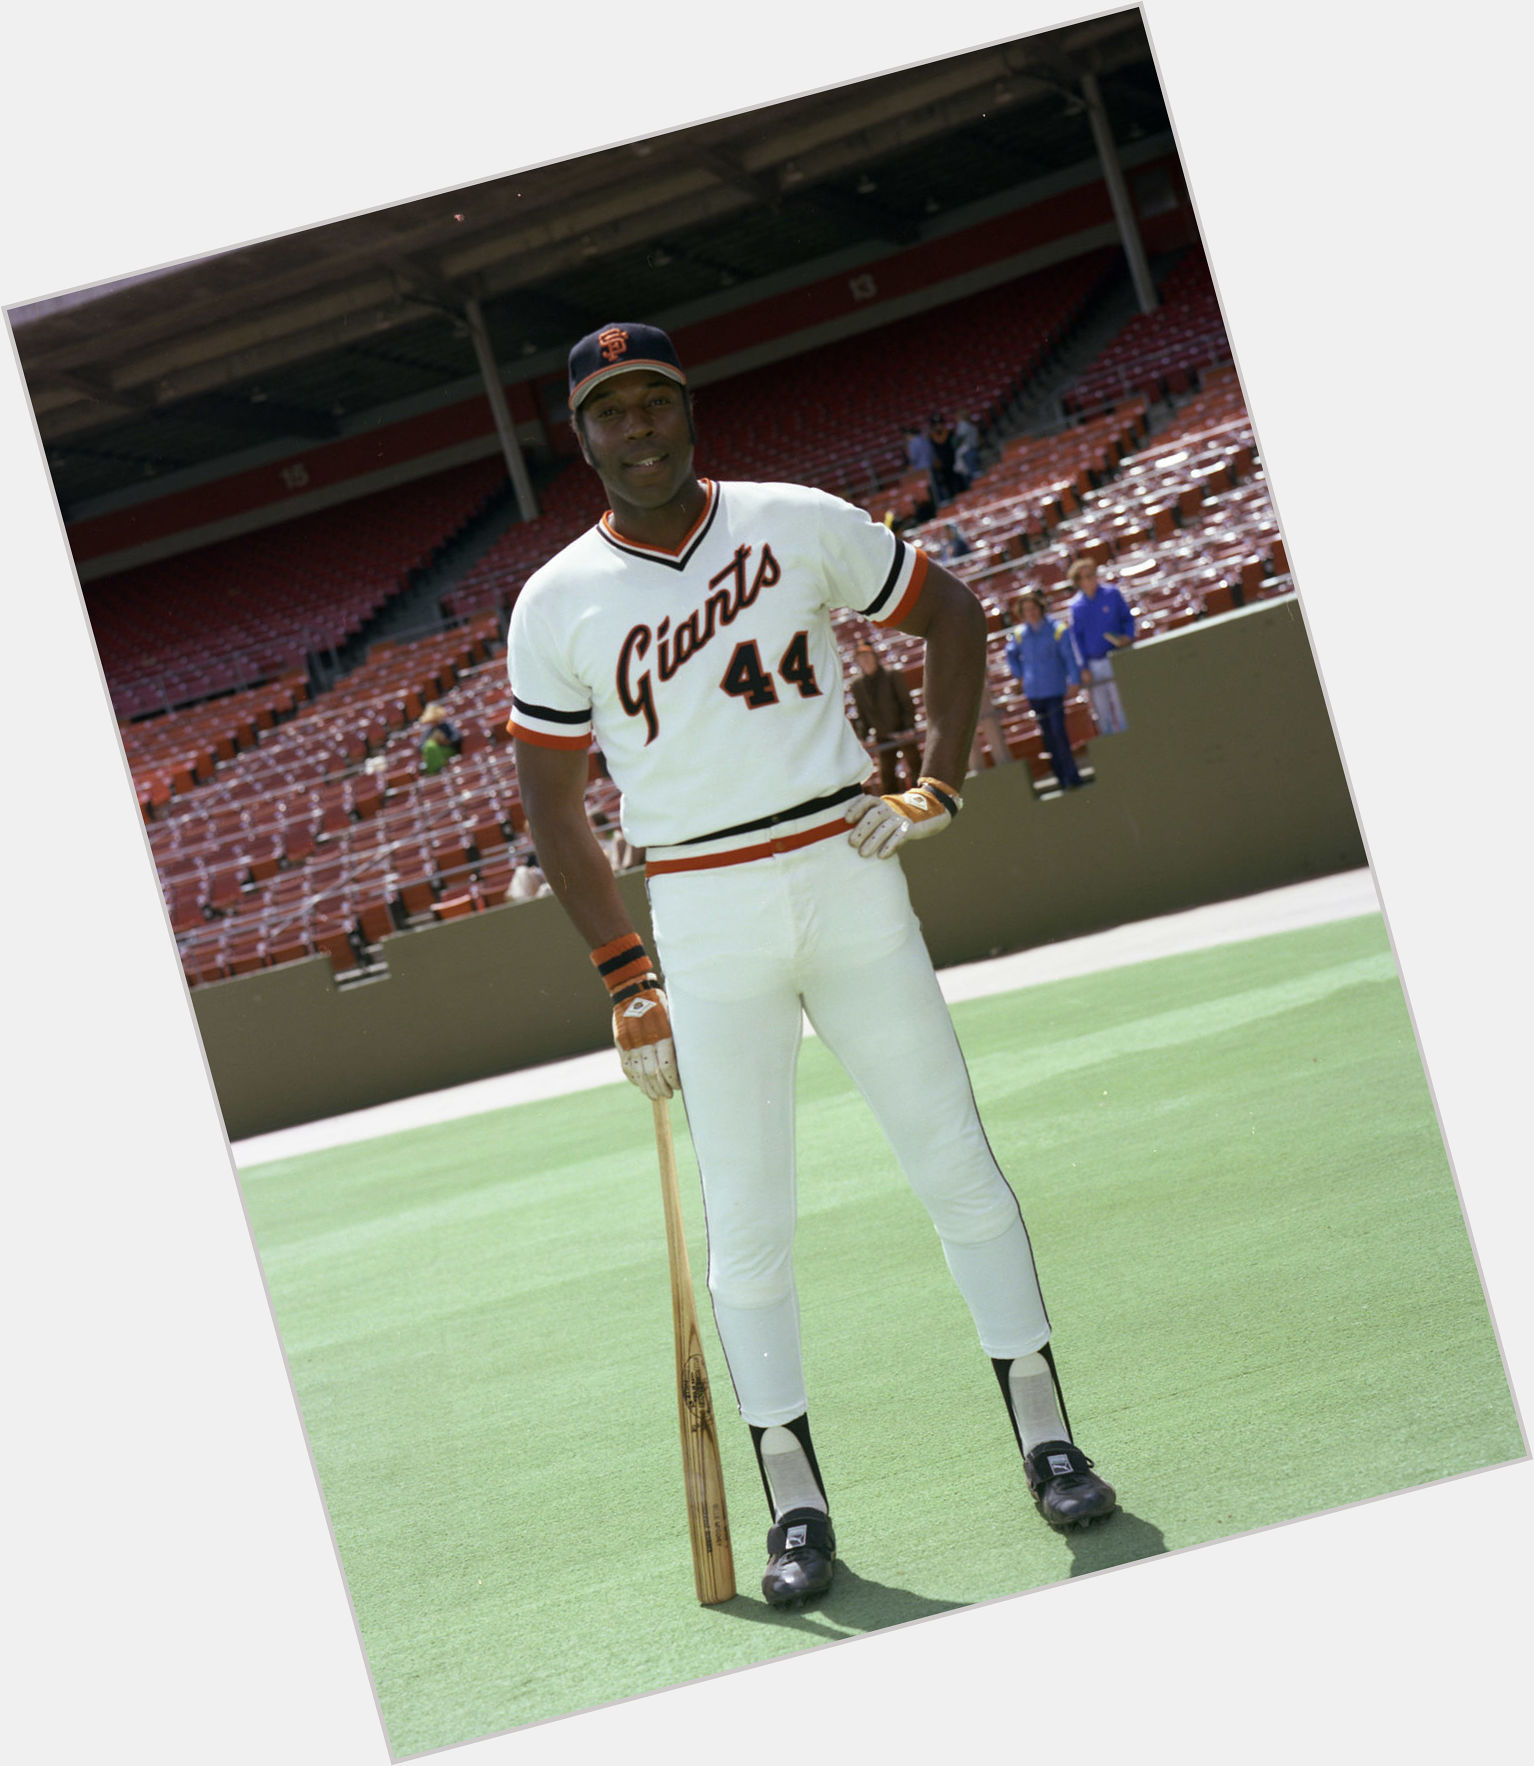 Https://fanpagepress.net/m/W/Willie Mccovey New Pic 1